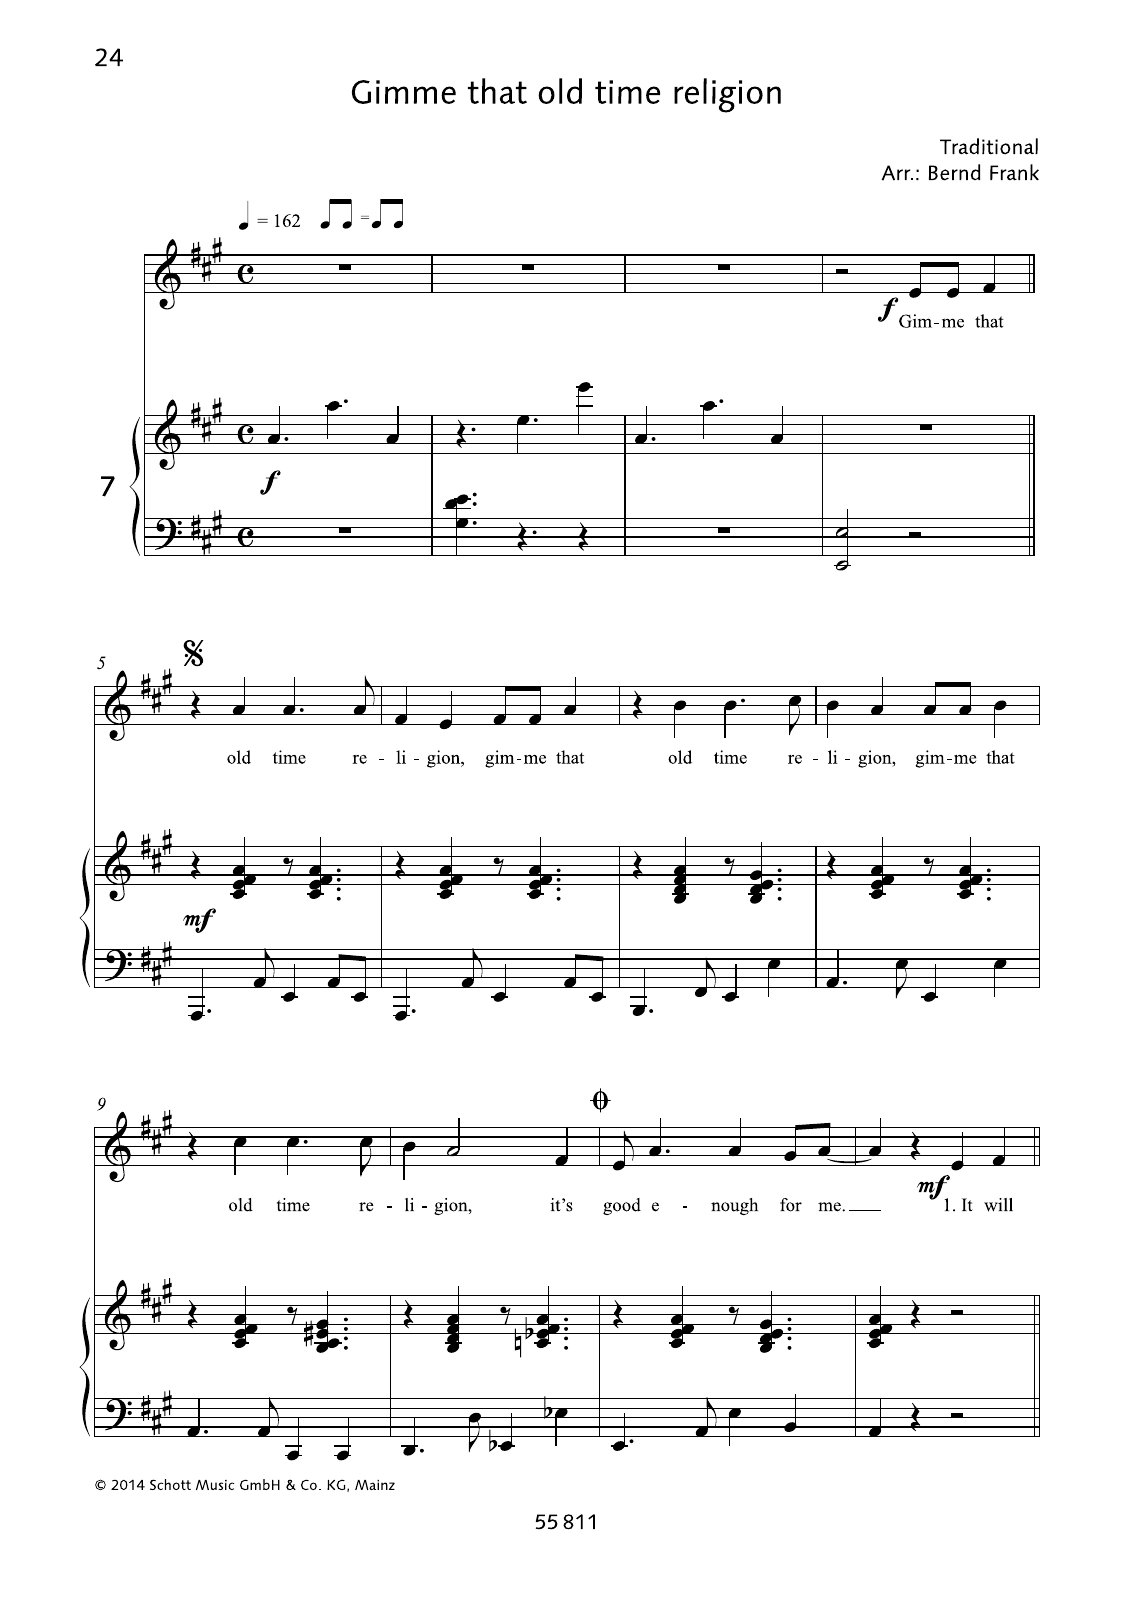 Download Bernd Frank Gimme that old time religion Sheet Music